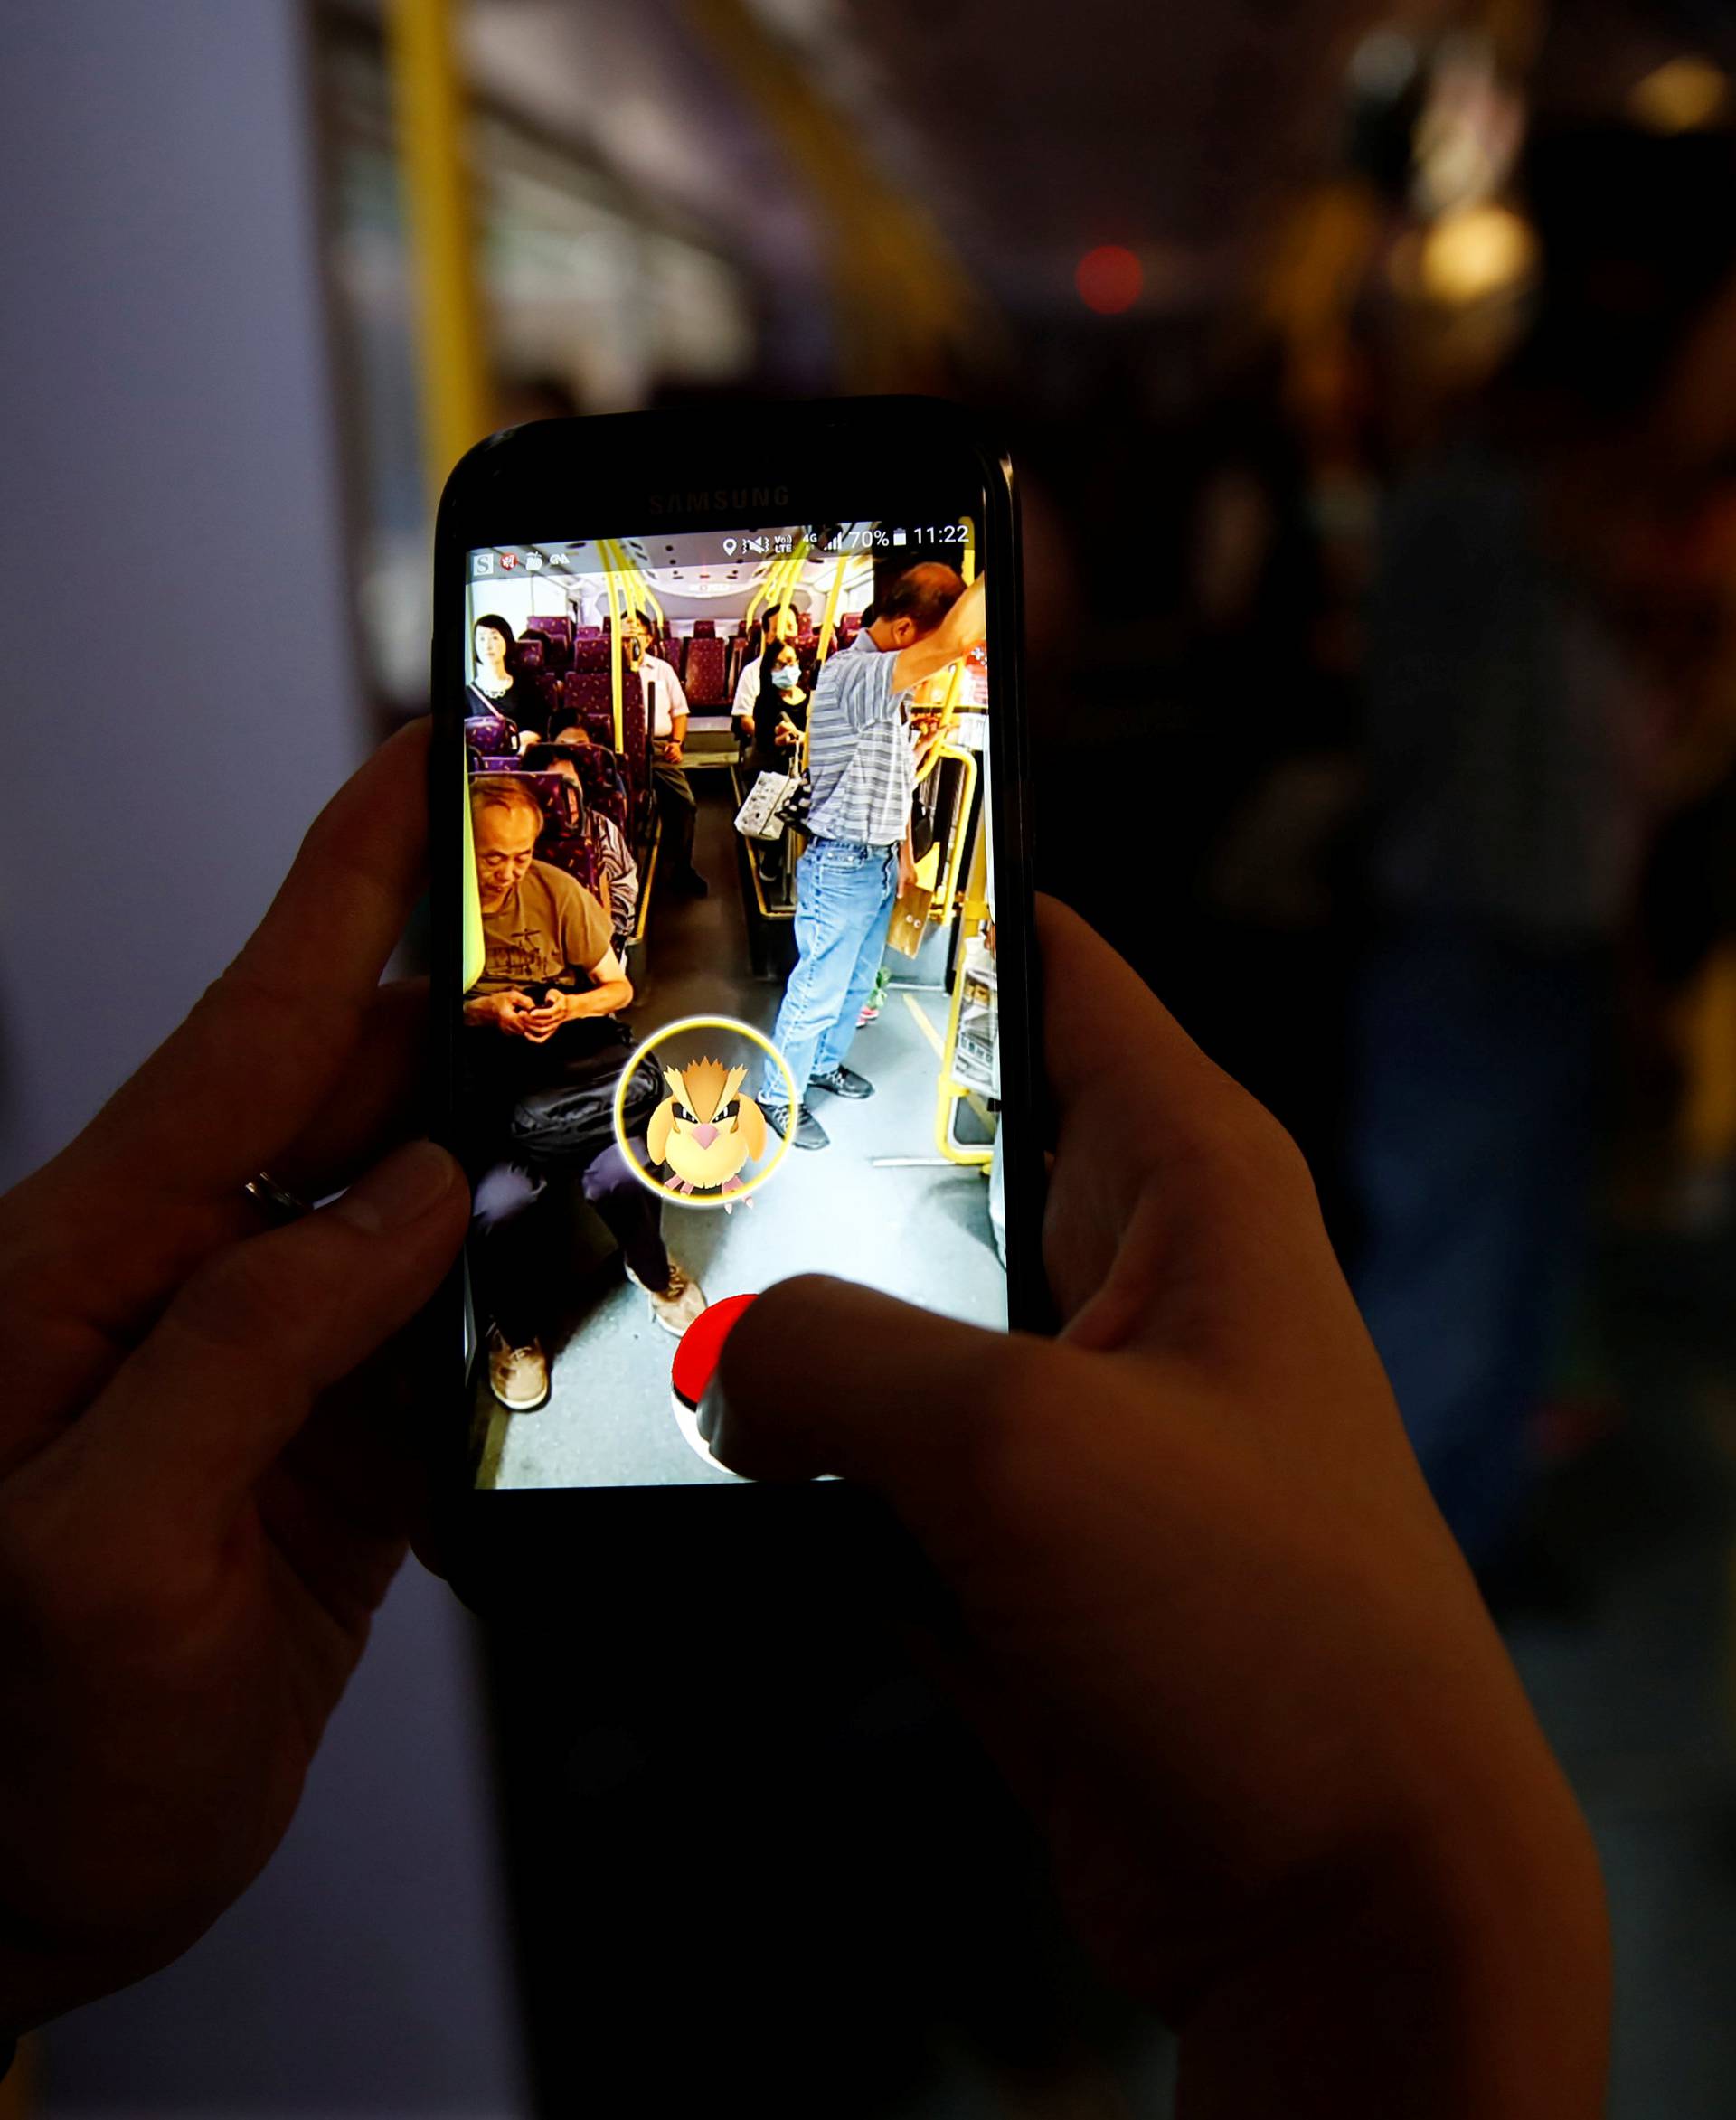 A passenger plays the augmented reality mobile game "Pokemon Go" by Nintendo inside a bus in Hong Kong, China 